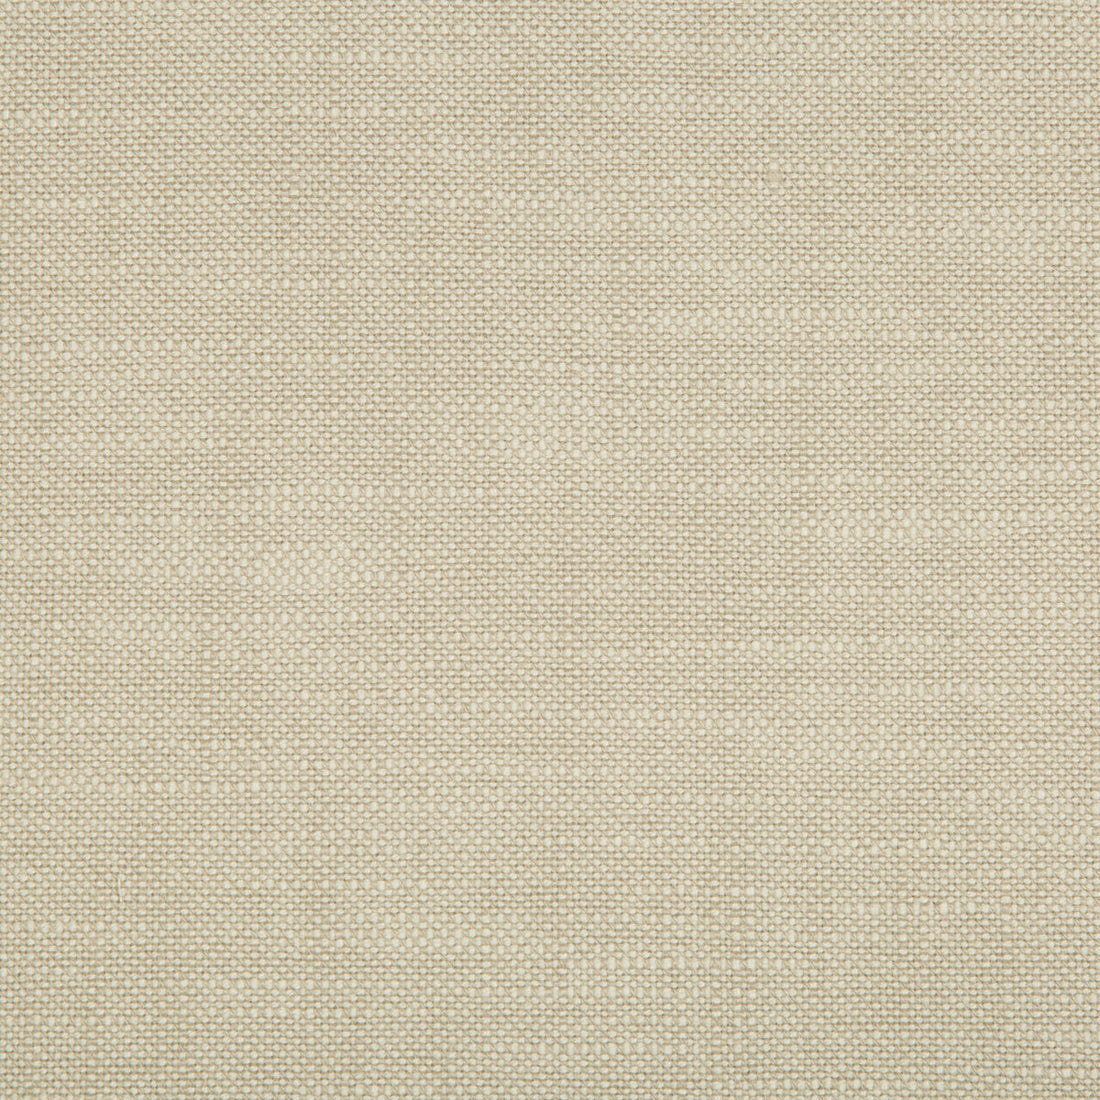 Kravet Contract fabric in 34633-1116 color - pattern 34633.1116.0 - by Kravet Contract in the Crypton Incase collection